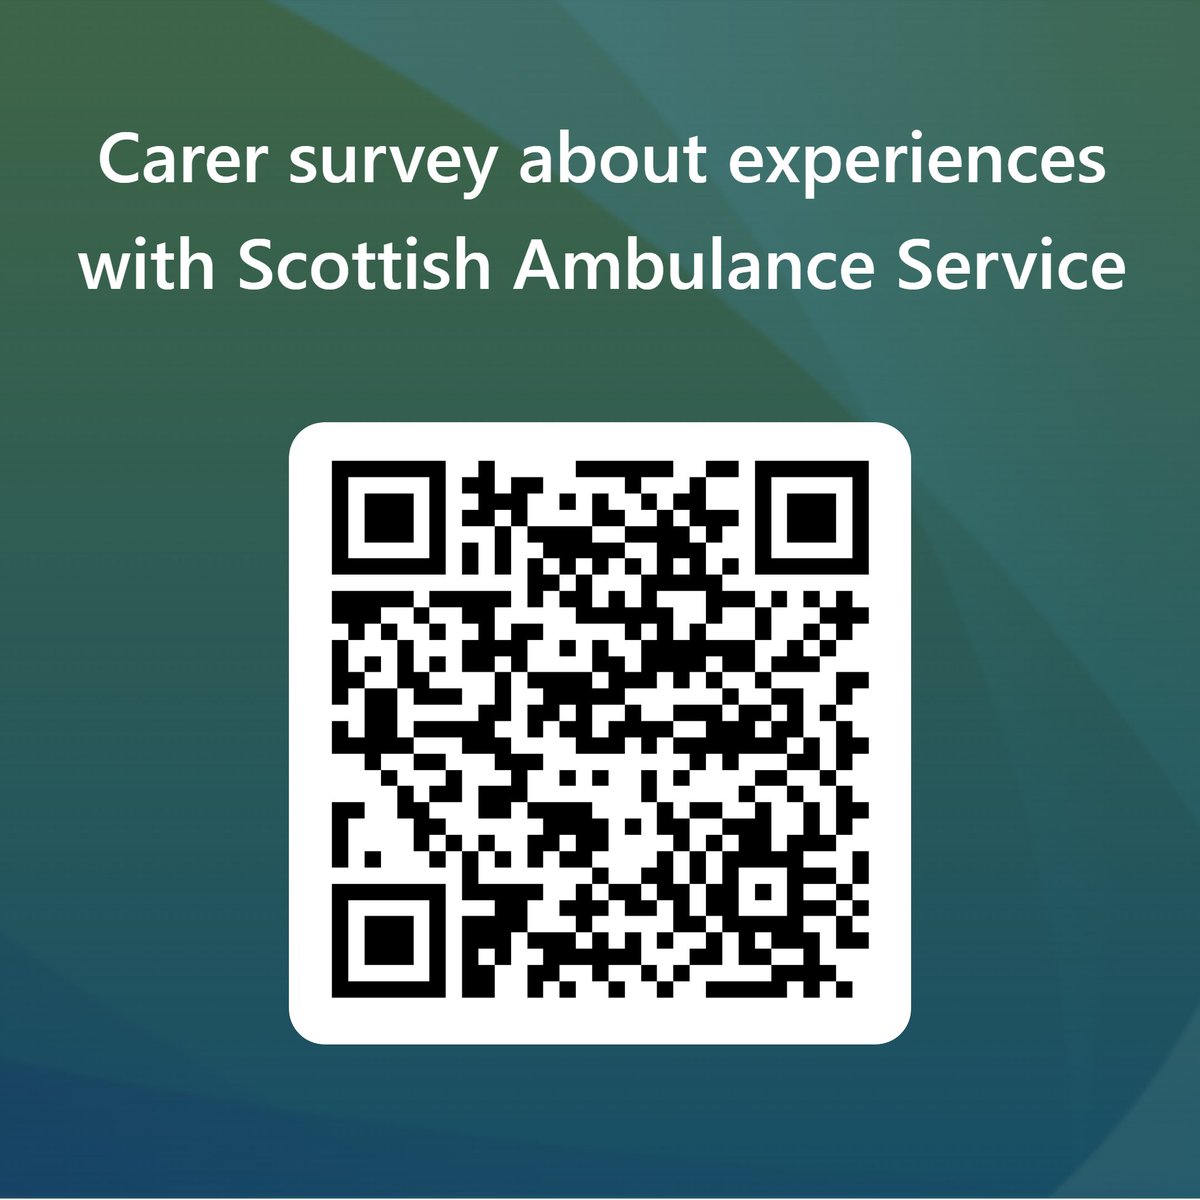 Carers, can you help Carers Scotland and Scottish Ambulance Service by completing this survey about recent interactions you may have had with the Ambulance Service when caring for someone with a terminal illness and/or at end of life? Find the survey here: forms.microsoft.com/e/C68xN2CqJ8